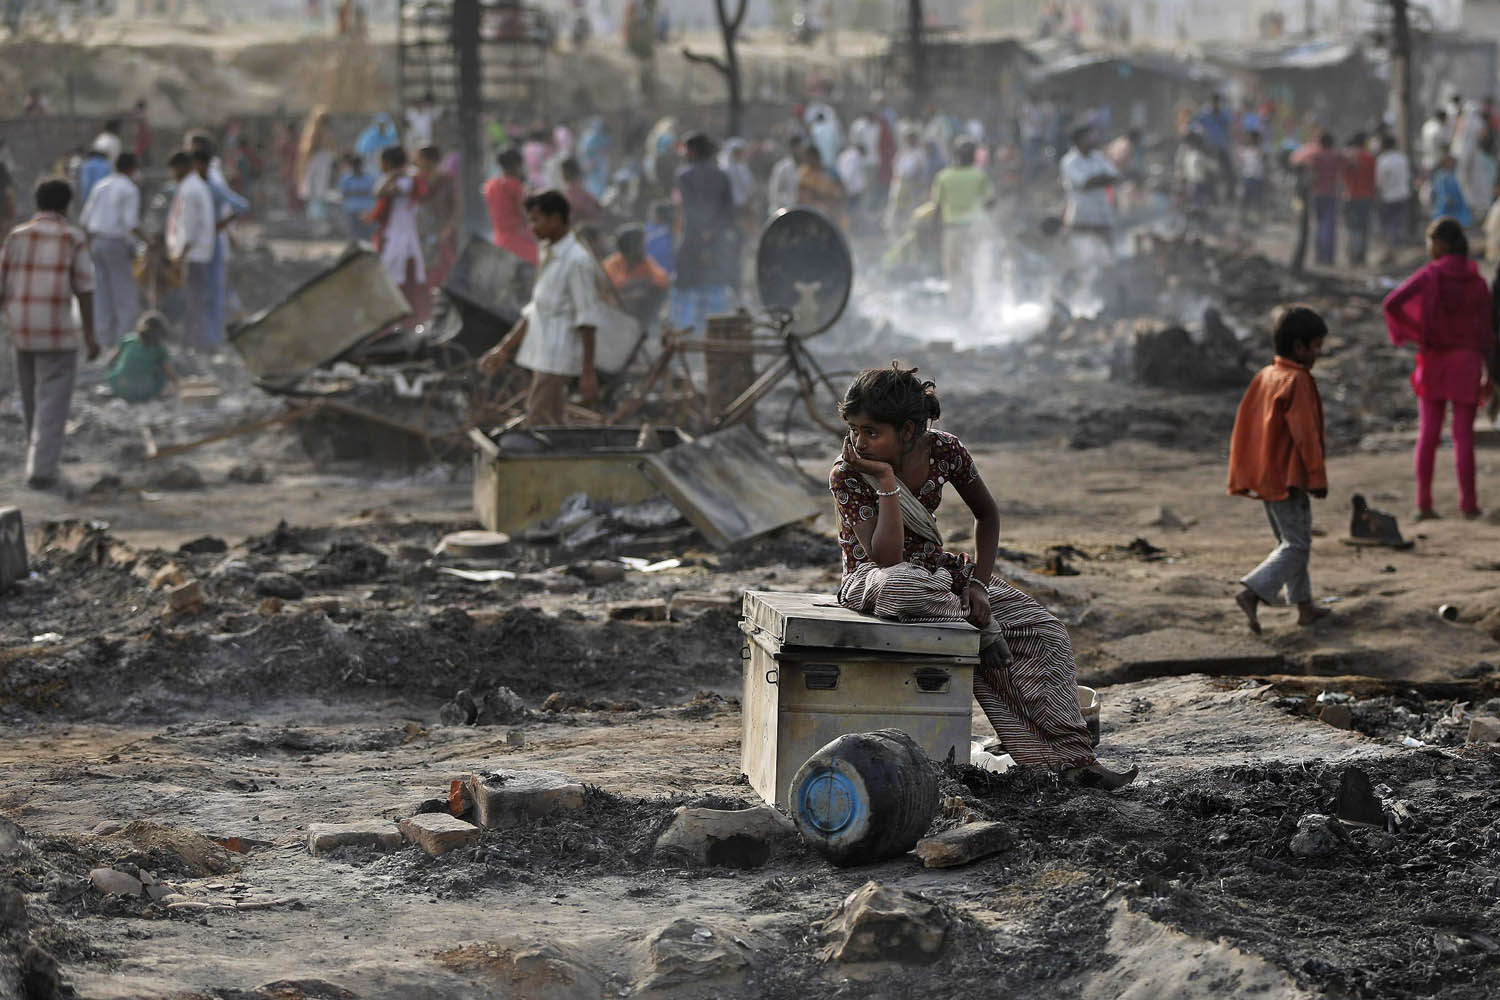 April 12, 2013. A local resident sits on a trunk amid the burnt debris of her hut after a fire broke out in a slum area in New Delhi.